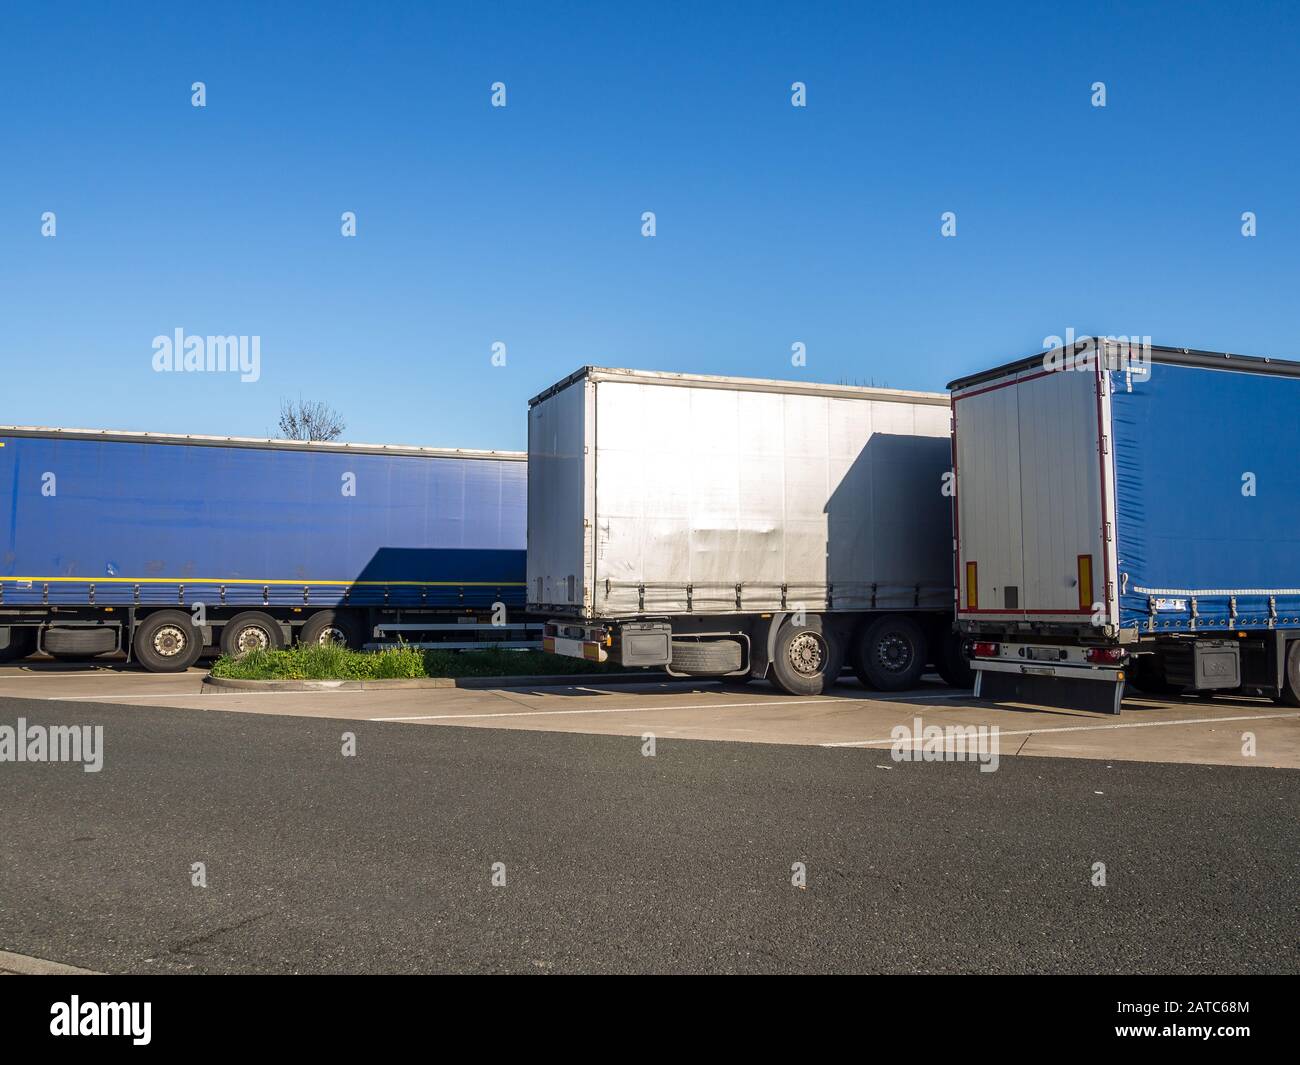 Trucks parked on a motorway rest area Stock Photo